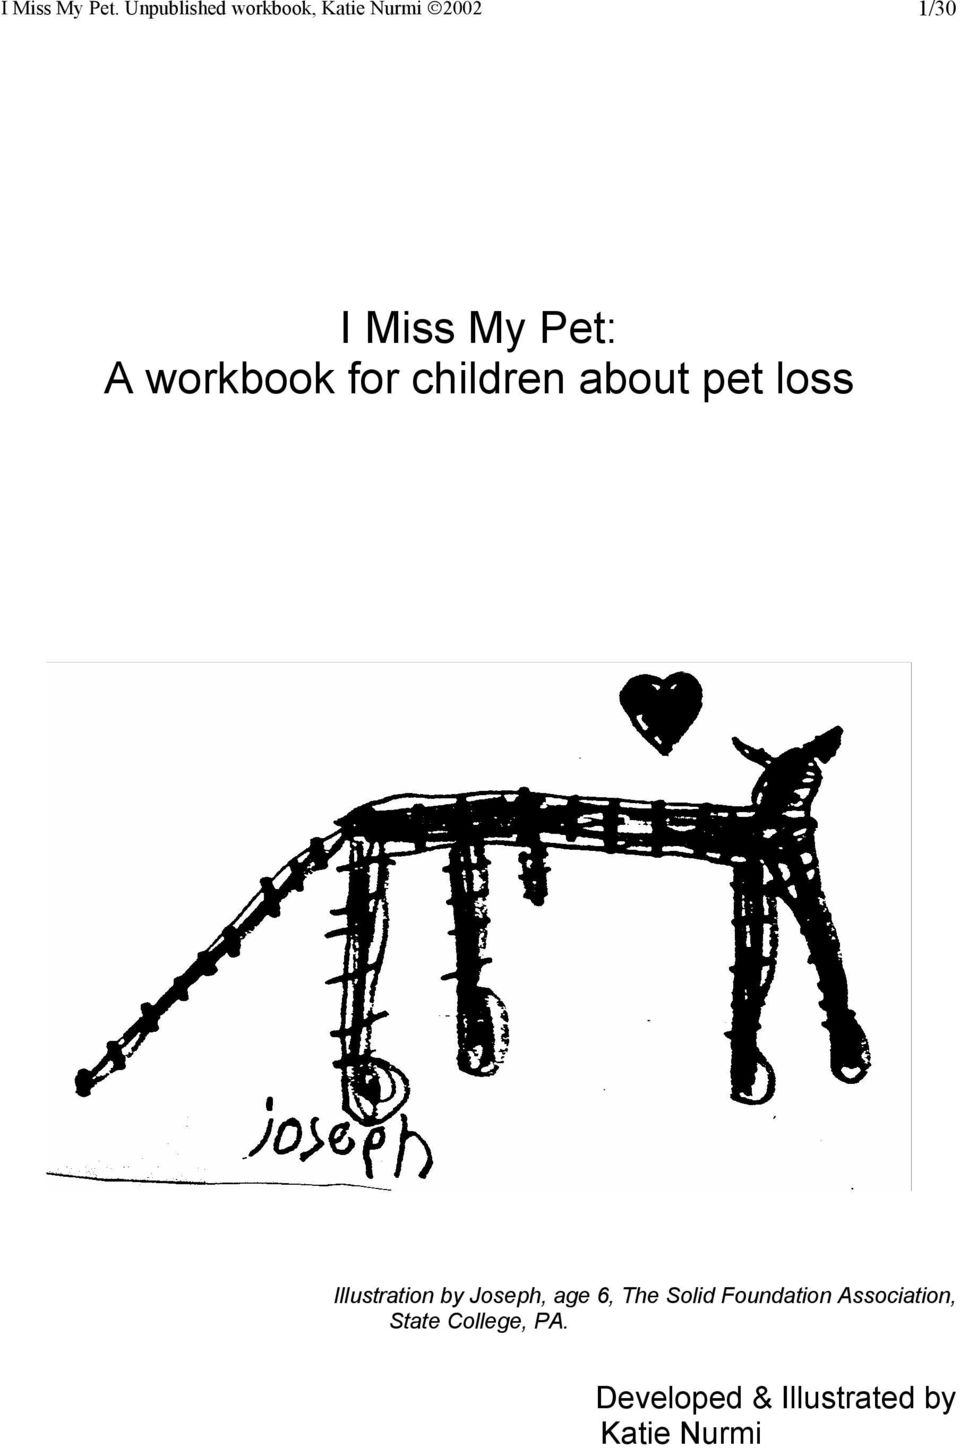 A workbook for children about pet loss Illustration by